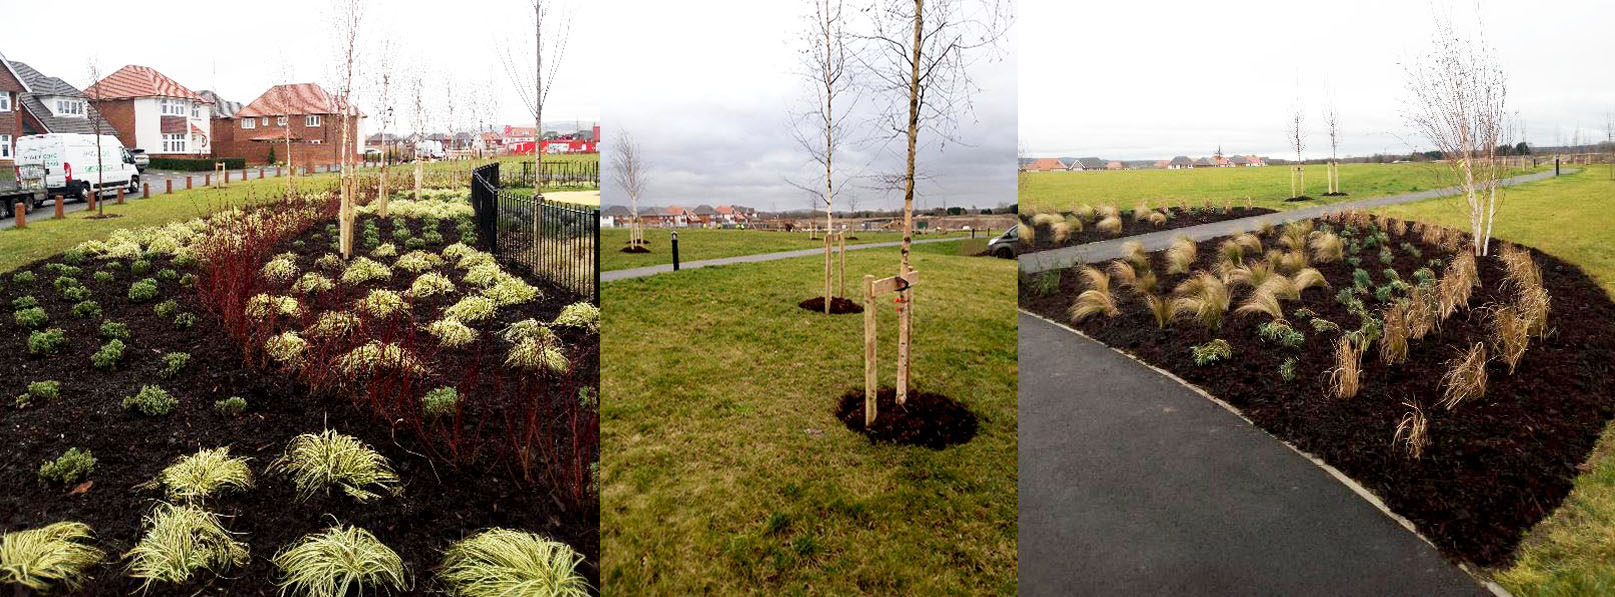 Image of our recent project in a new estate in Manchester where we supplied and installed shrubs, trees and barking